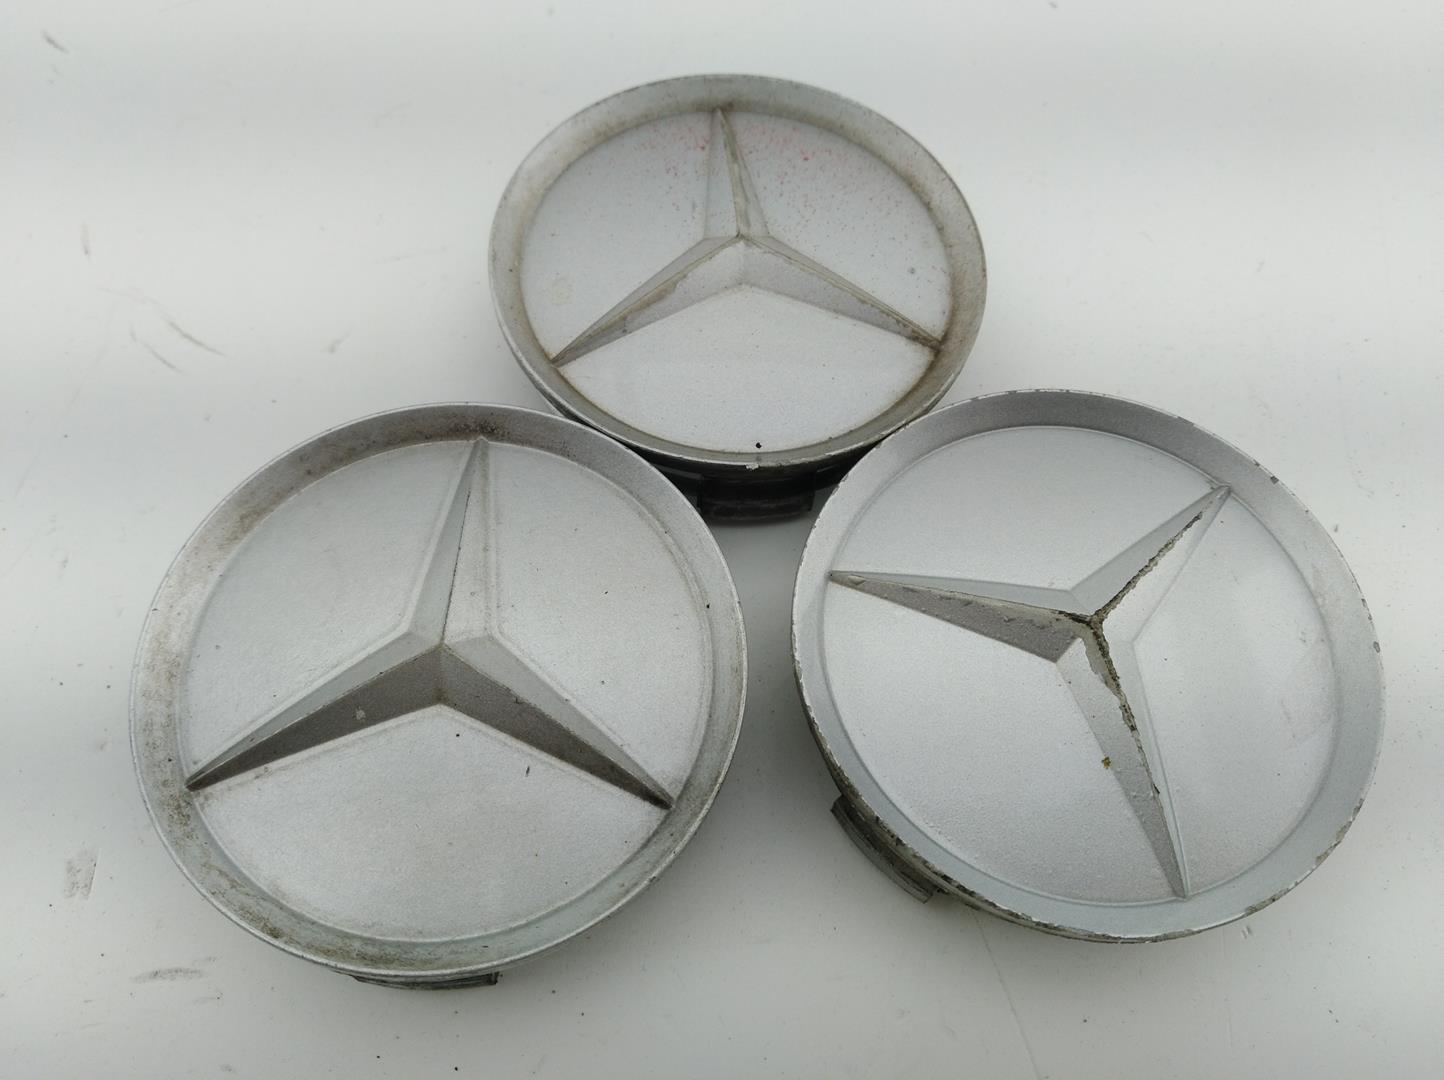 MERCEDES-BENZ 190 (W201) 1 generation (1982-1993) Wheel Covers 2014010225, 2014010225, 2014010225 19346640